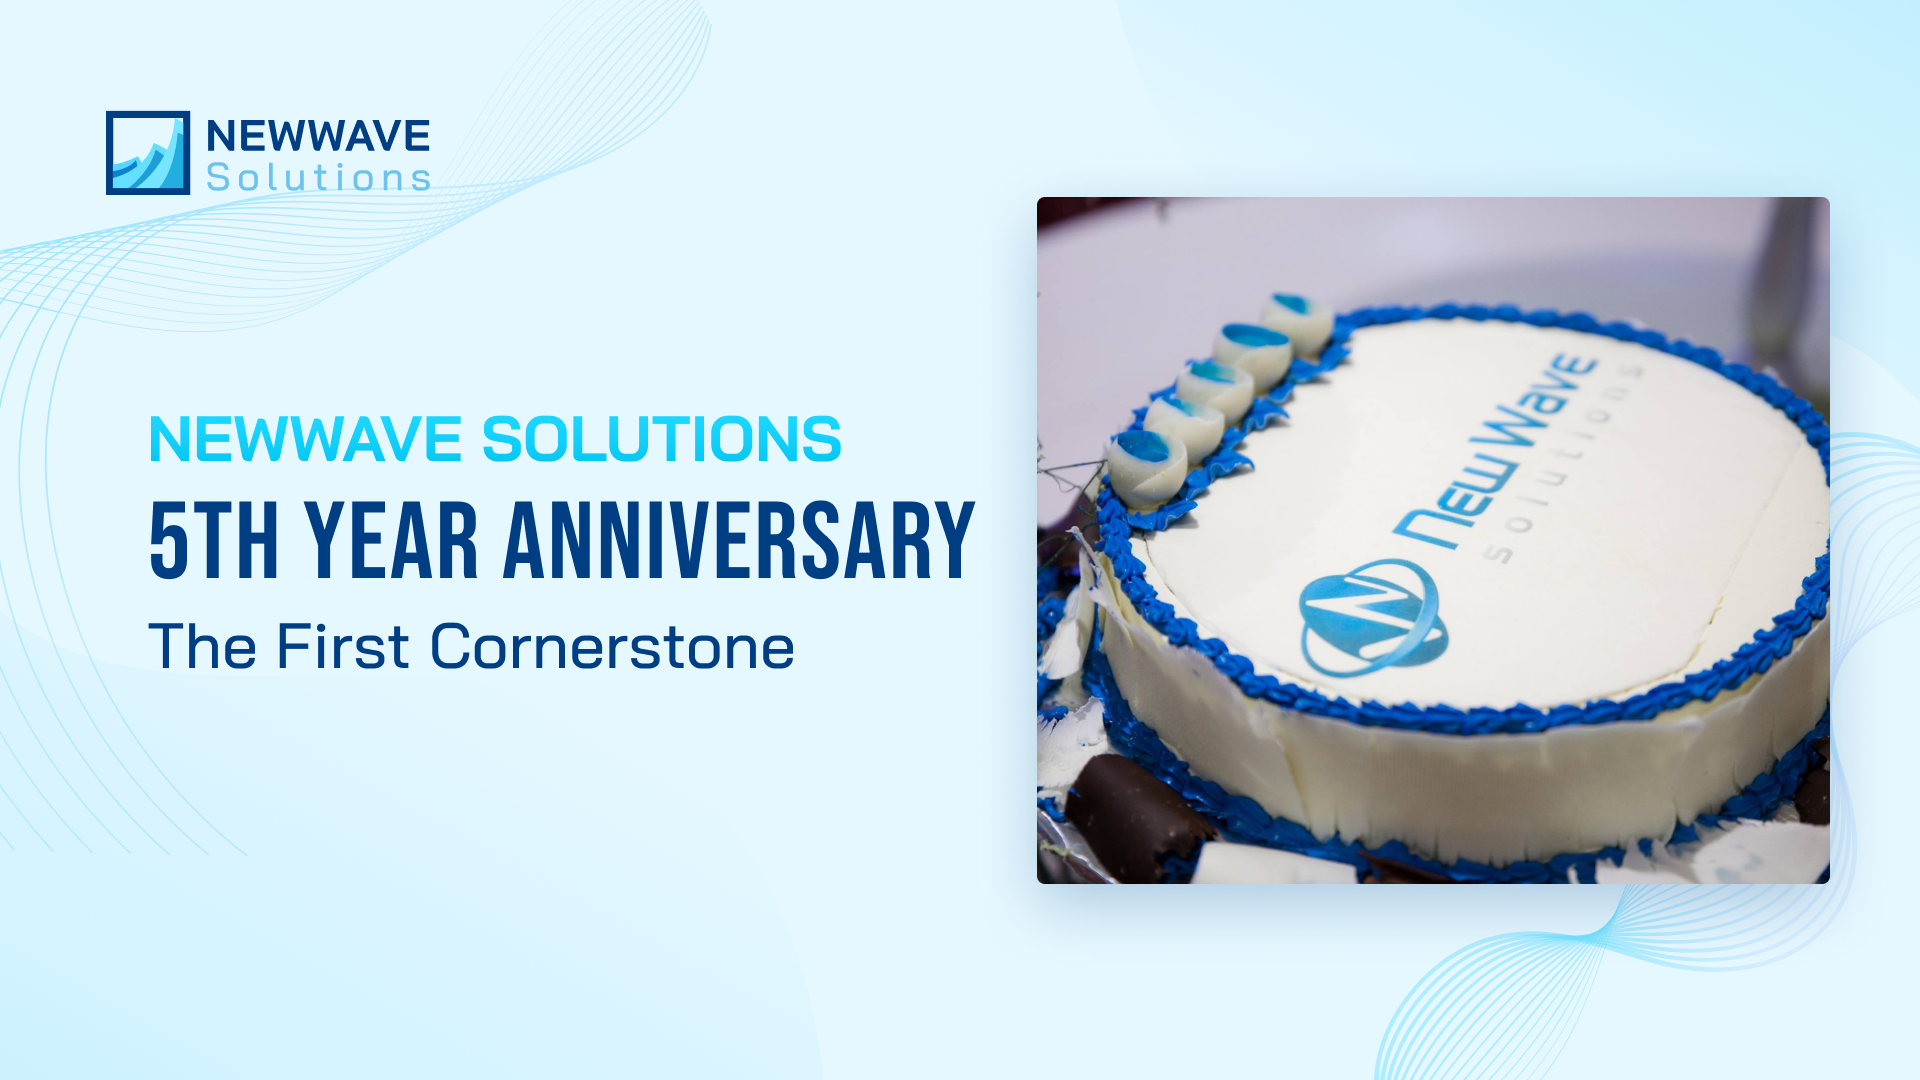 Newwave Solutions’ 5th Year Anniversary - The First Cornerstone